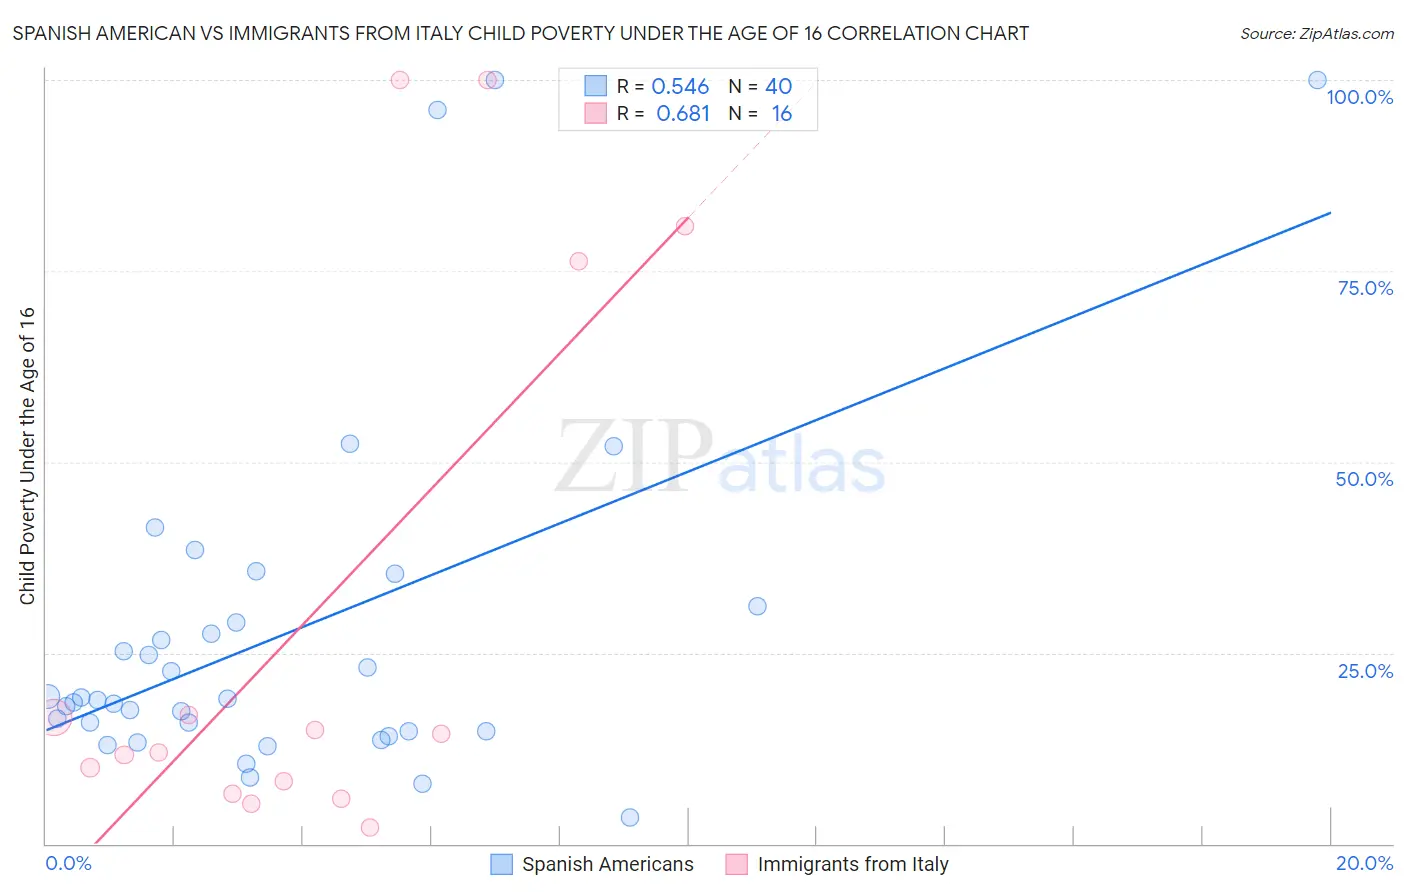 Spanish American vs Immigrants from Italy Child Poverty Under the Age of 16